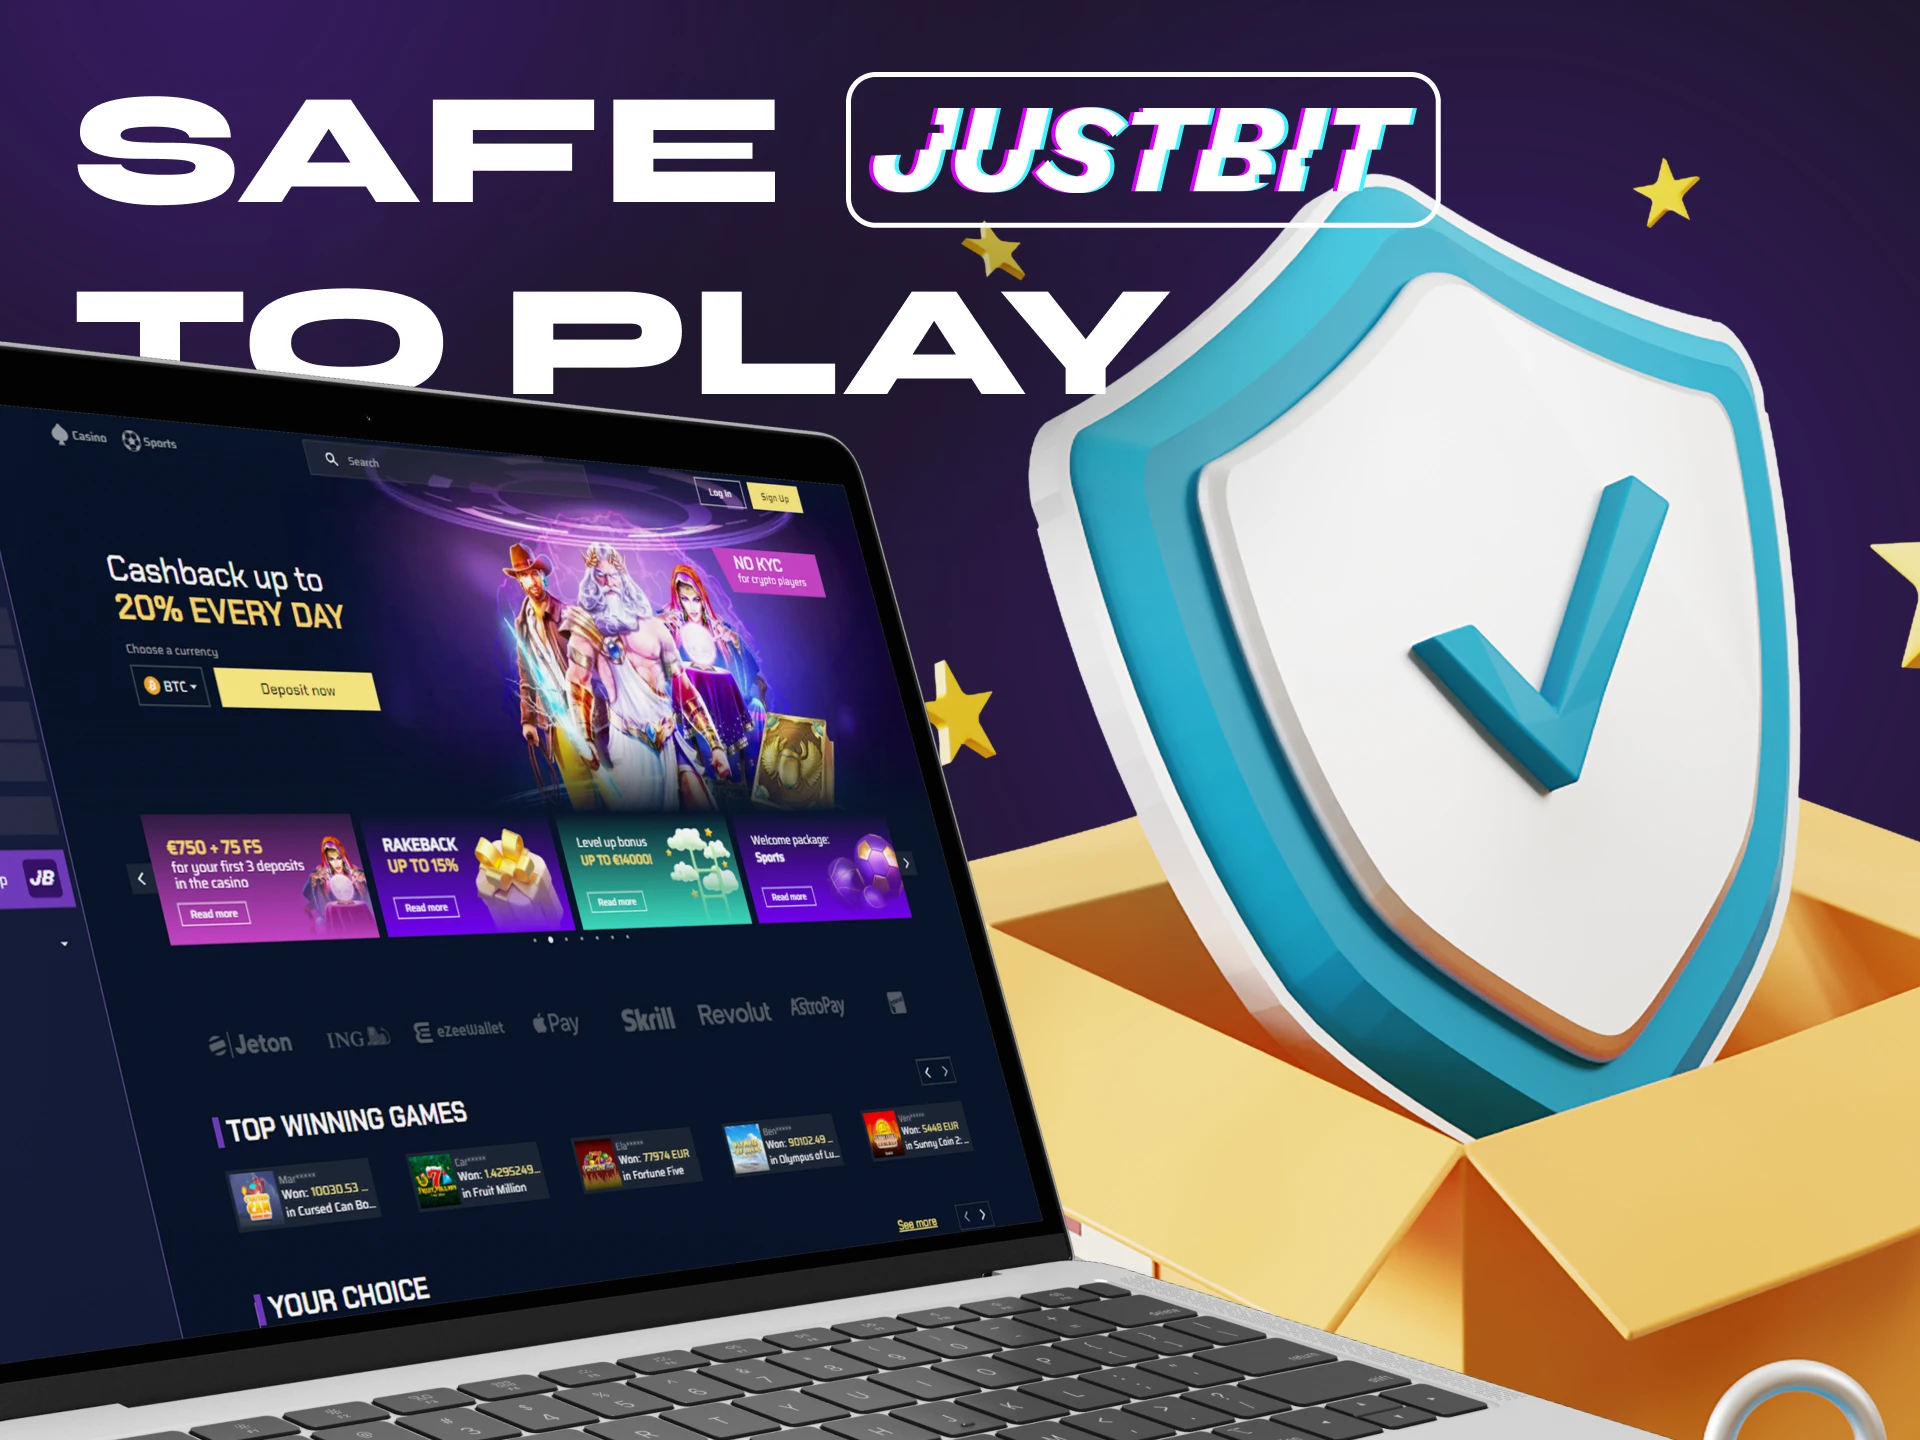 Be confident in your security with Justbit crypto casino.